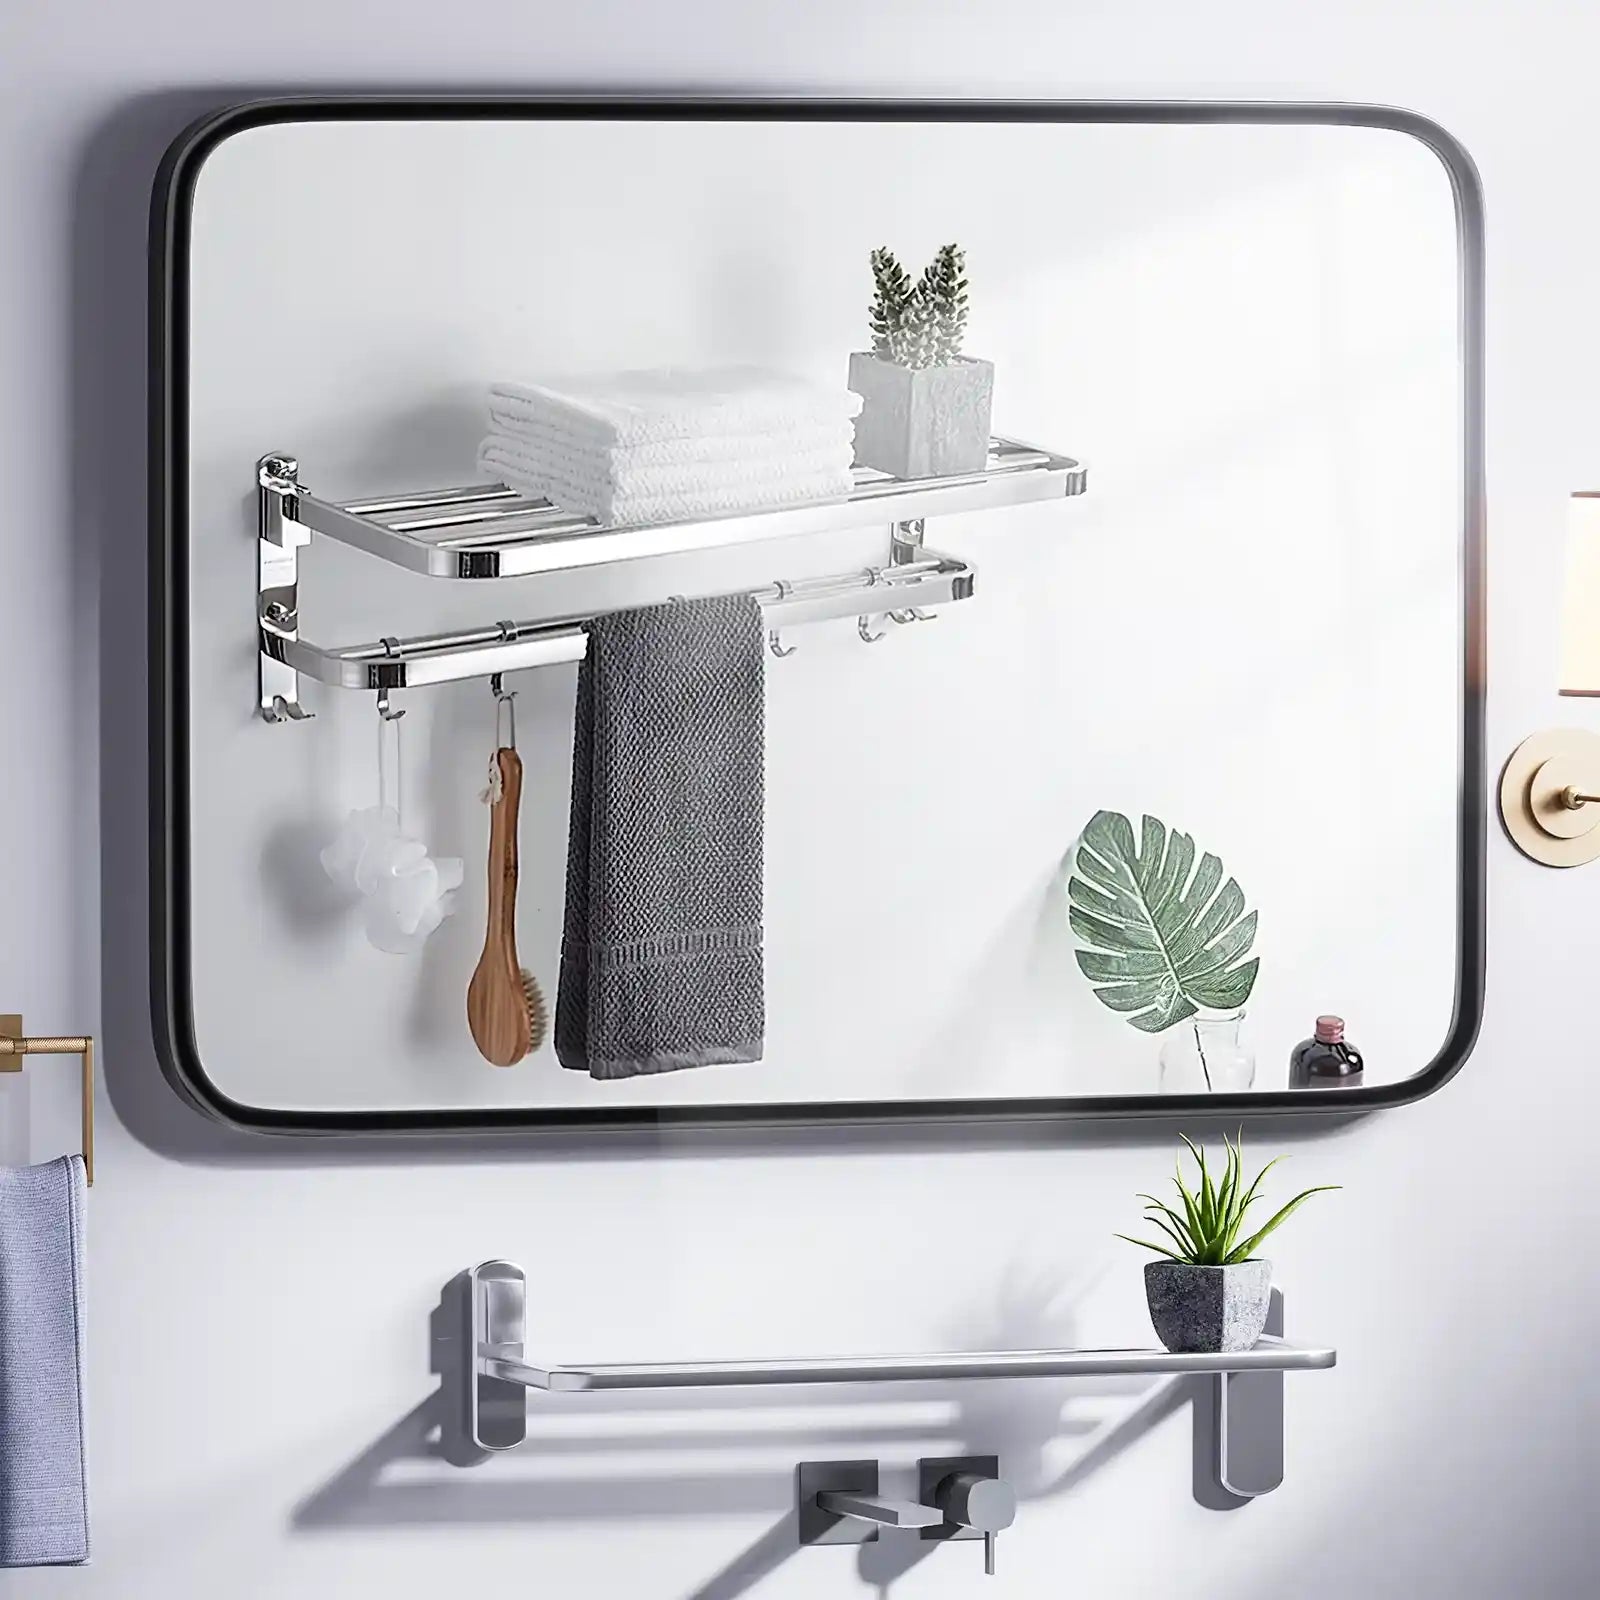 Bathroom Mirror, Wall Mounted Vanity Mirror 28" X 36", Rounded Corner Rectangle Wall Mirrors, Home Decor Metal Framed Bath Mirror for Living Room Bedroom, Hangs Horizontal or Vertical